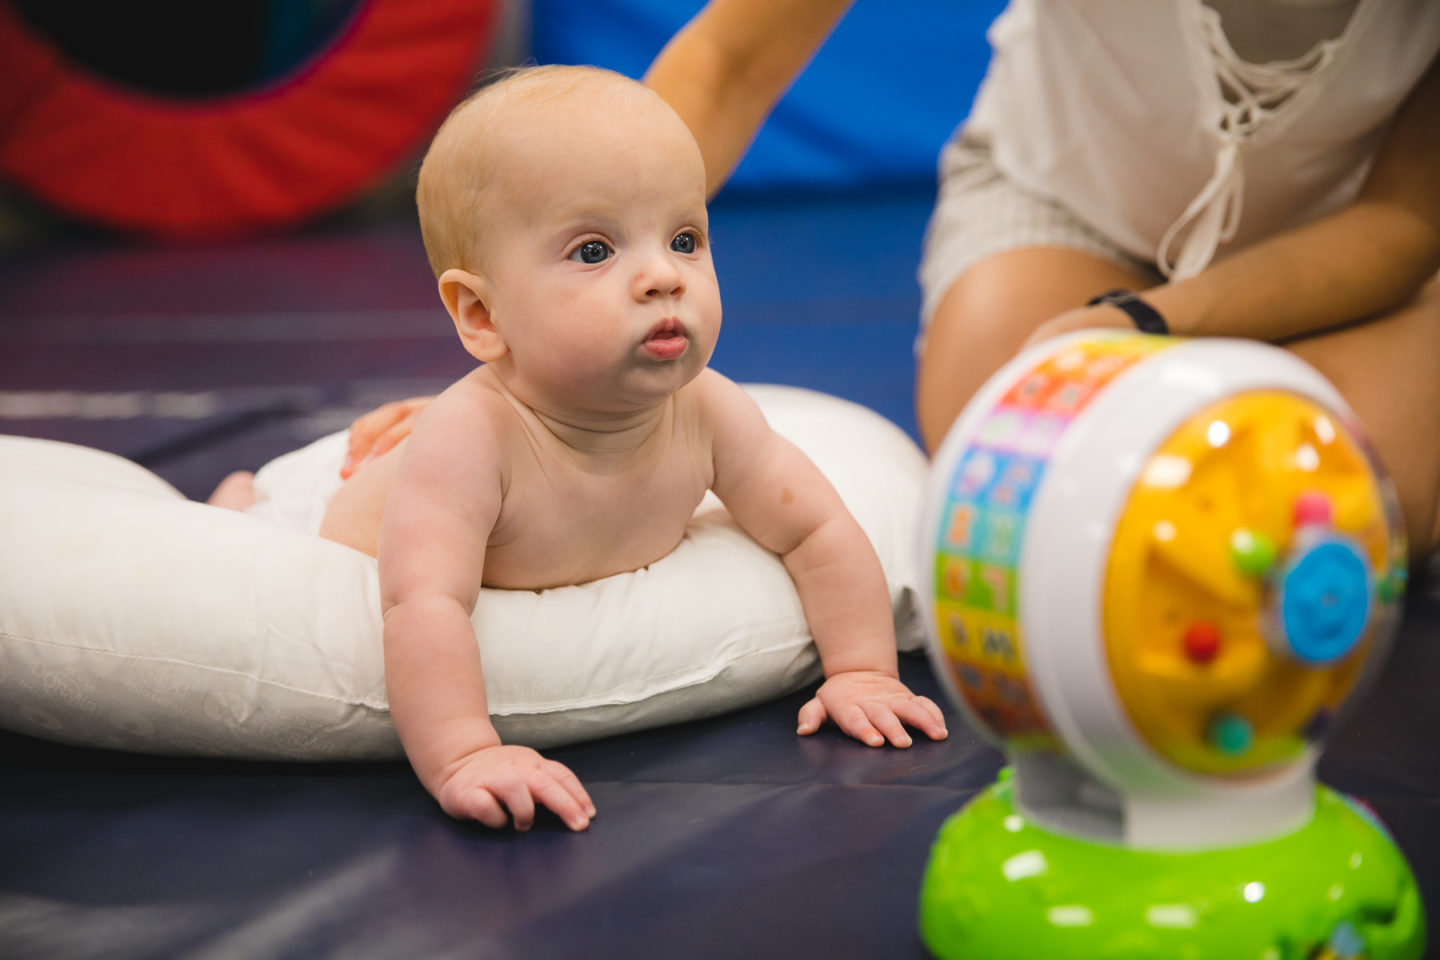 Torticollis and plagiocephaly